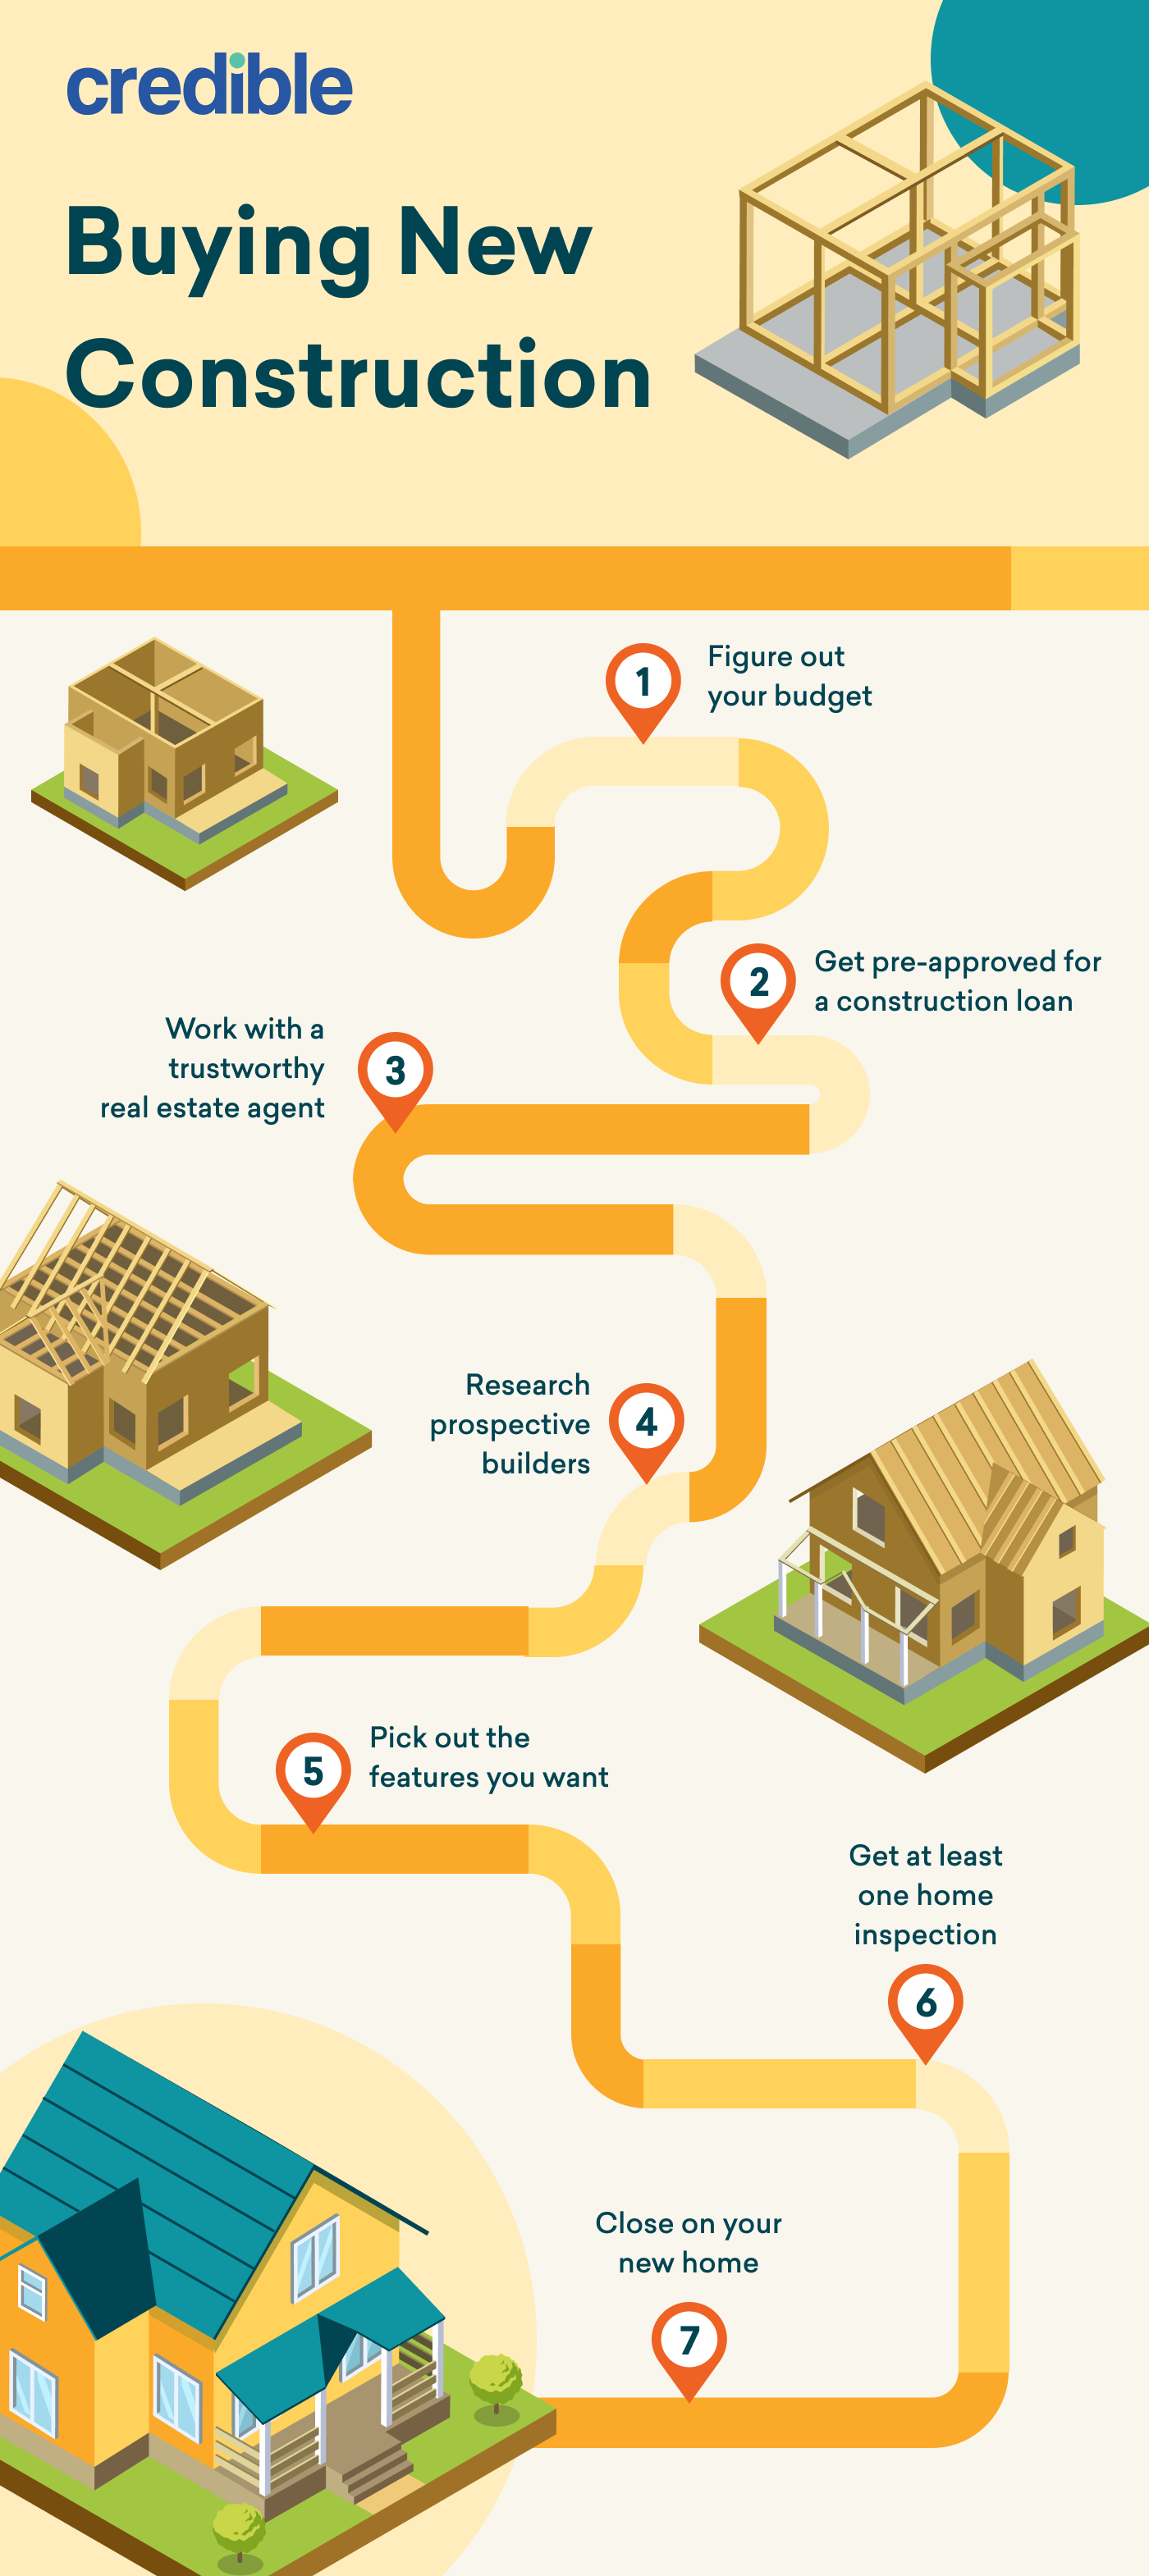 7 Things Every New Home Construction Buyer Should Research (Infographic) -  West End Home Builders' Association